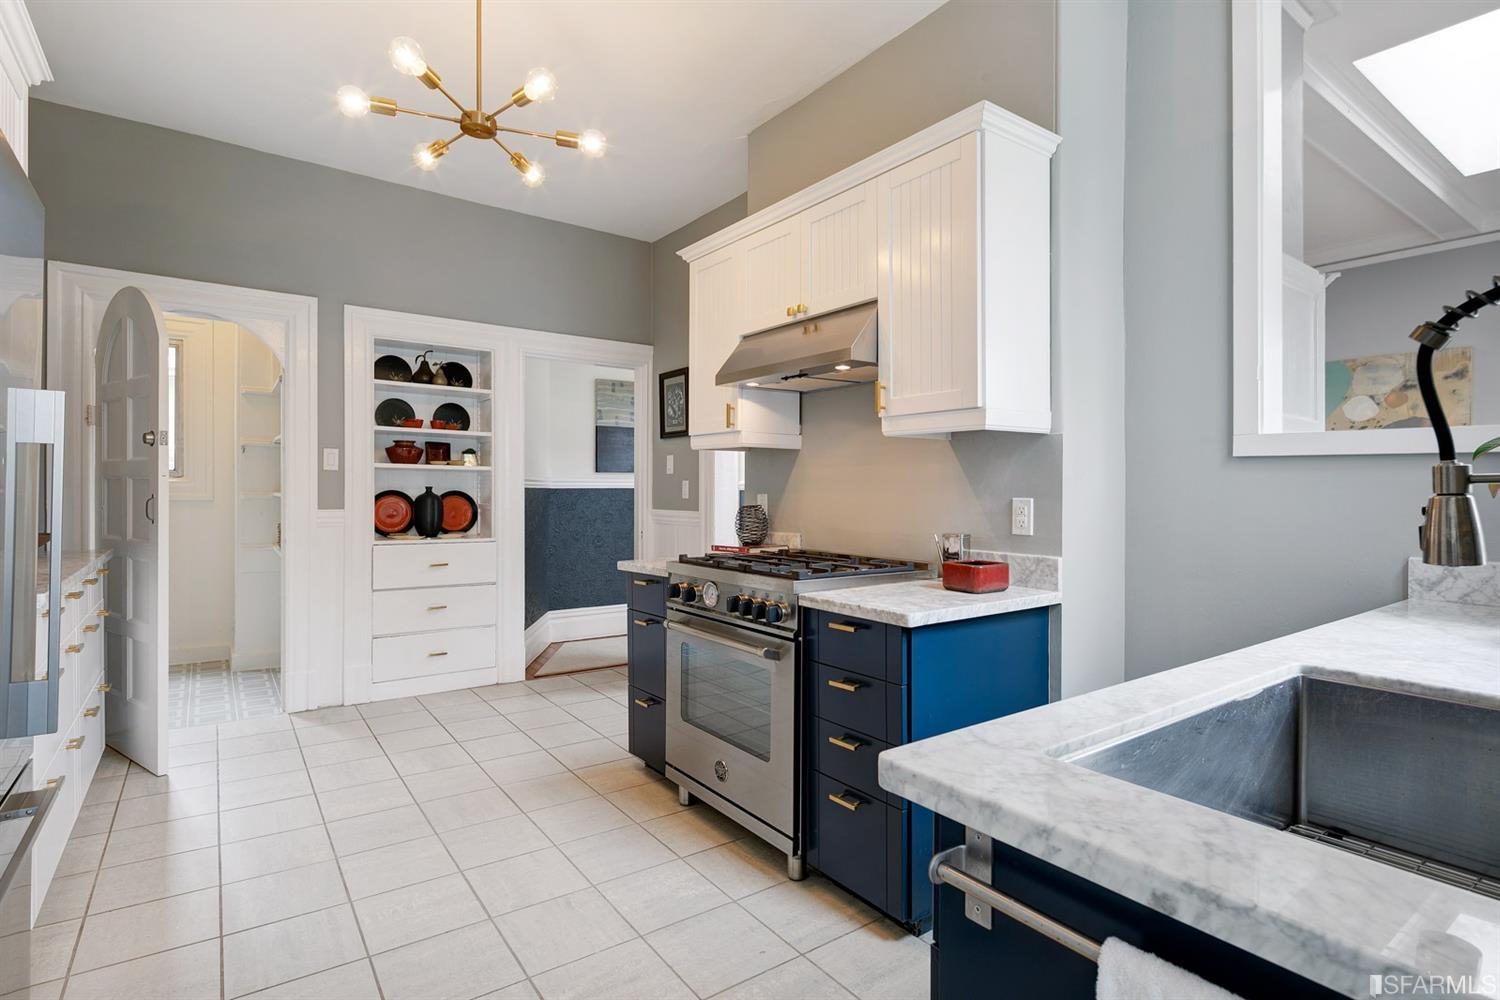 Property Photo: View of the kitchen, showing built-in white cabinets along one wall